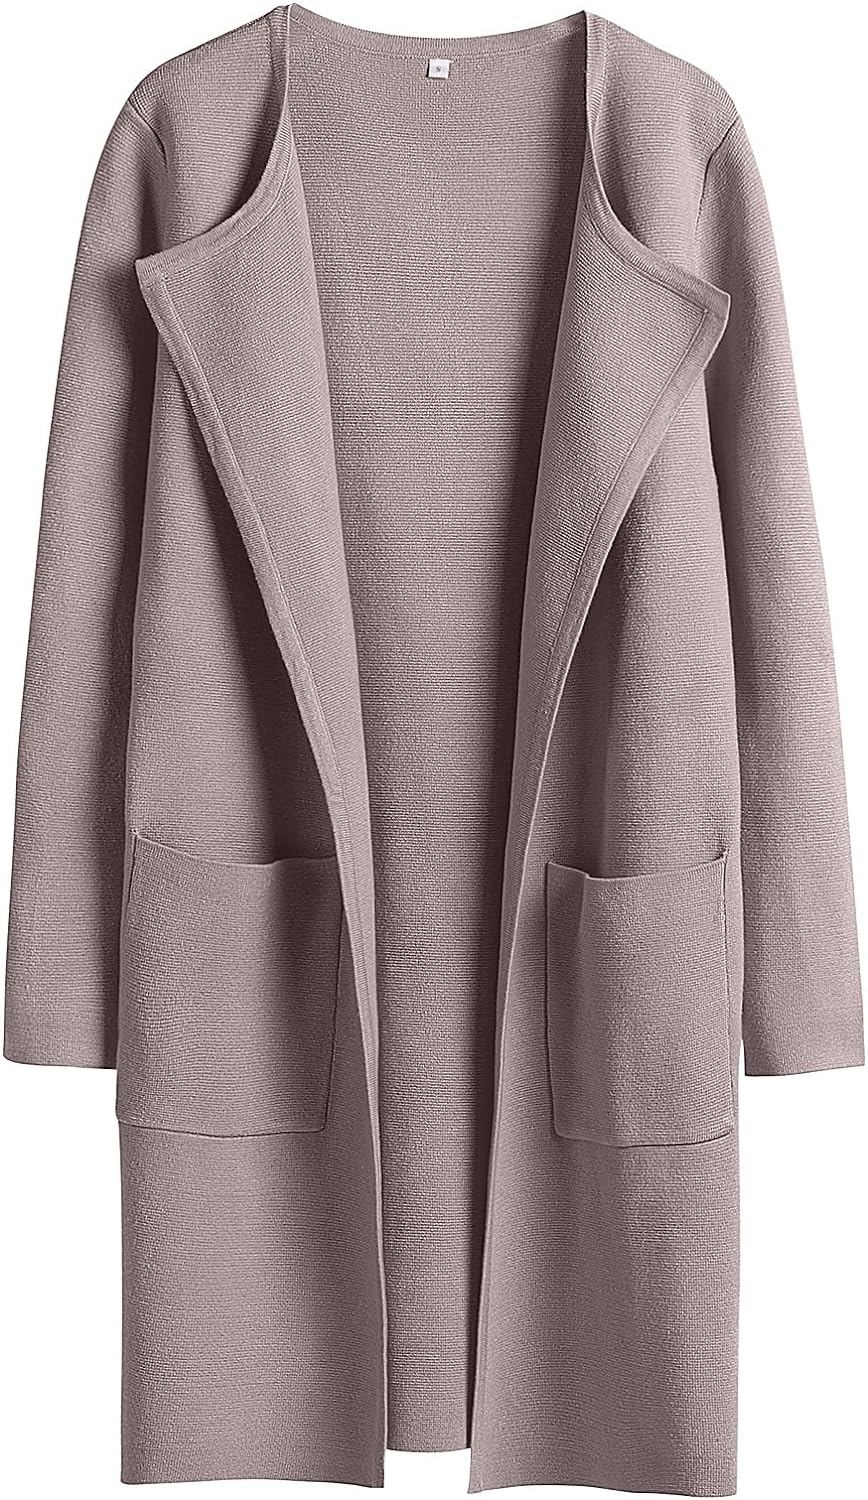 Discover Exciting Discounts! Prinbara Women's Open Front Knit Cardigan Long Sleeve Lapel Casual Solid Classy Sweater Jacket Trench Coats in Gray Almond - X-Small. Limited-Time Specials!